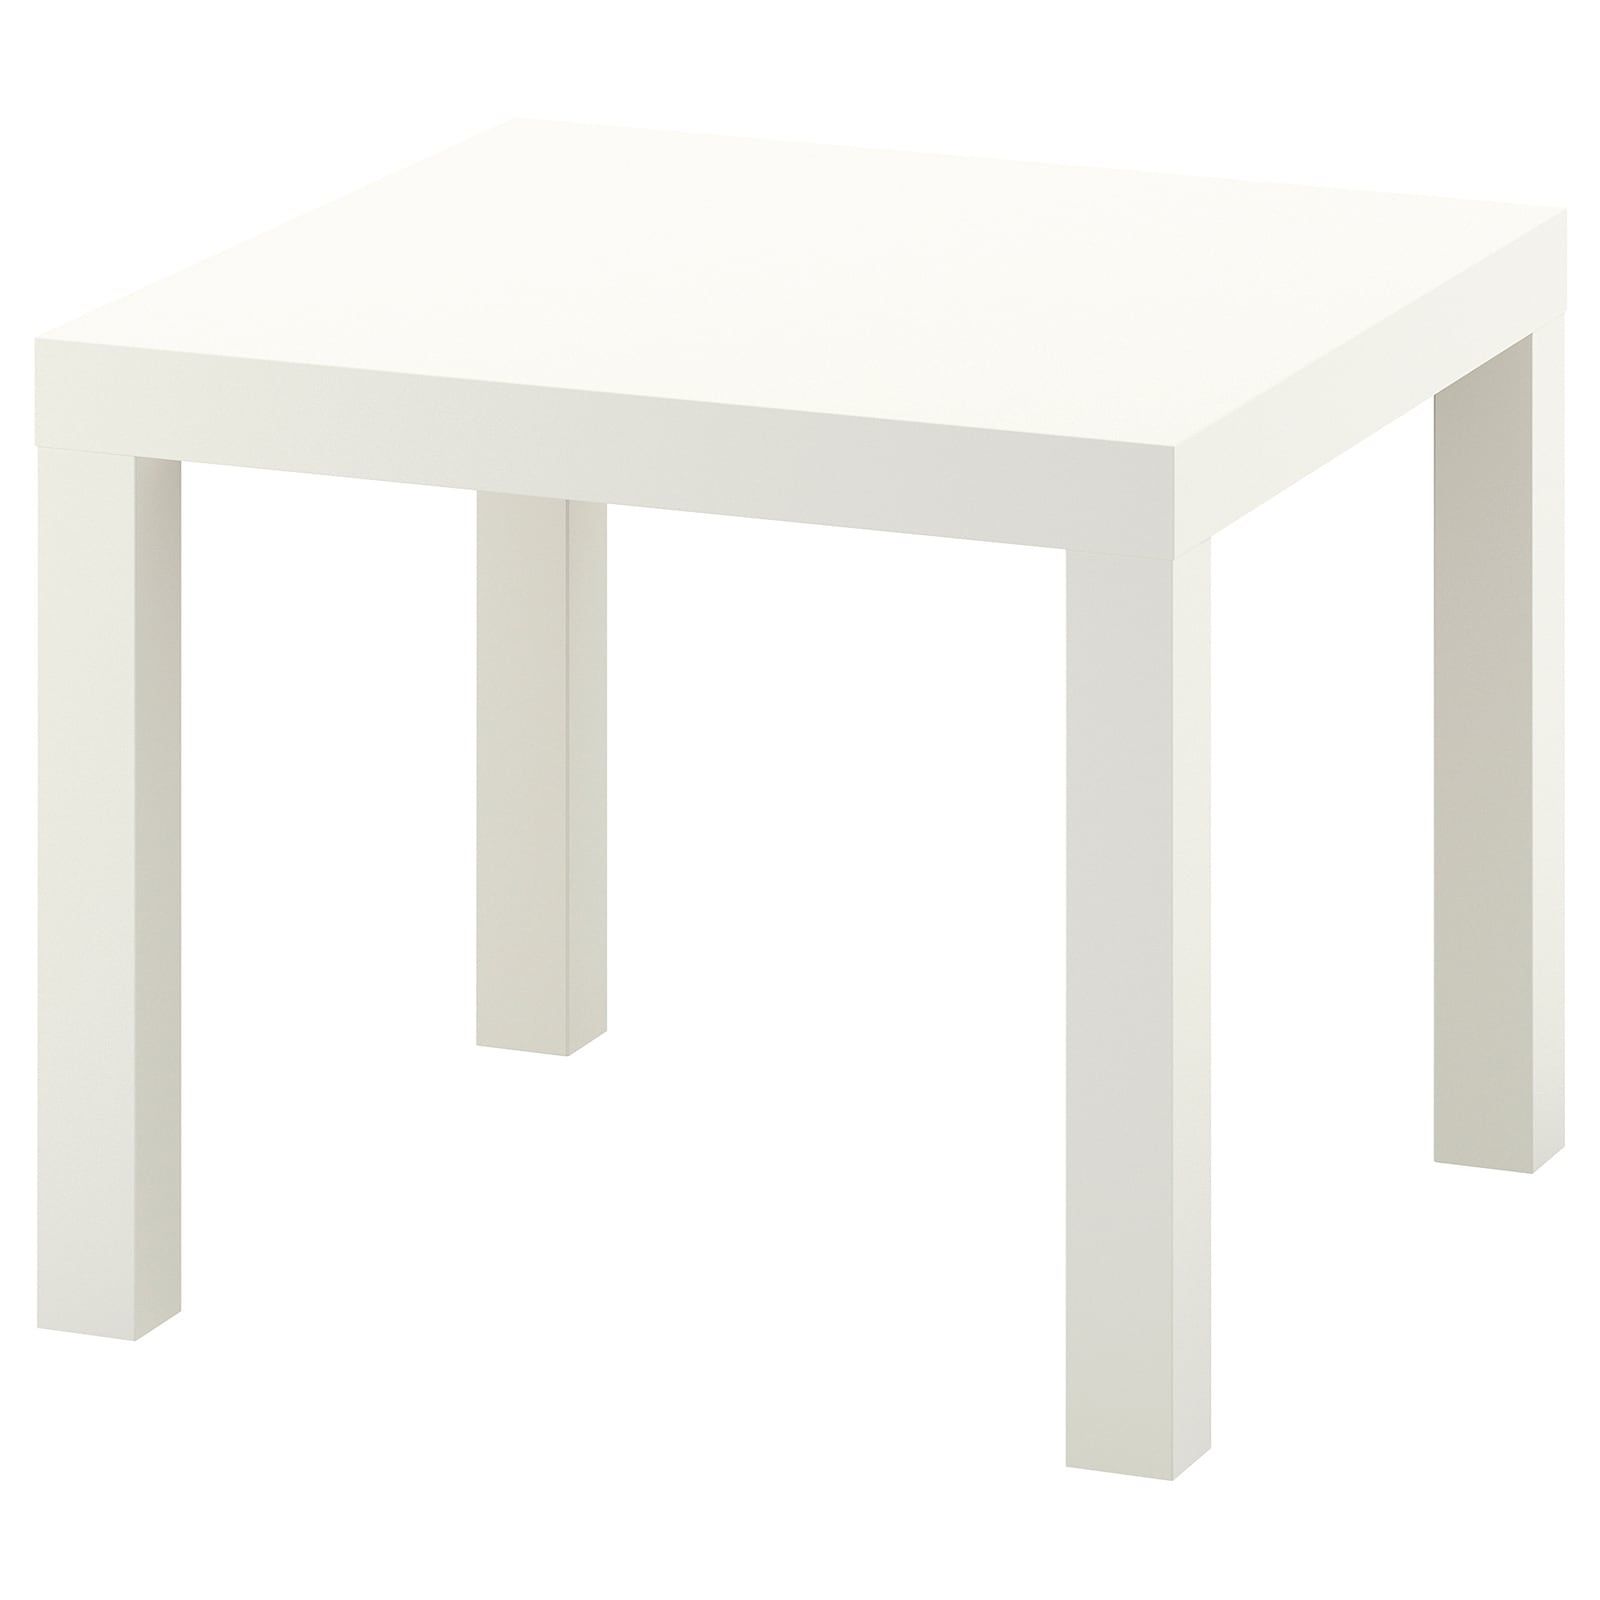 IKEA LACK side accent table - white